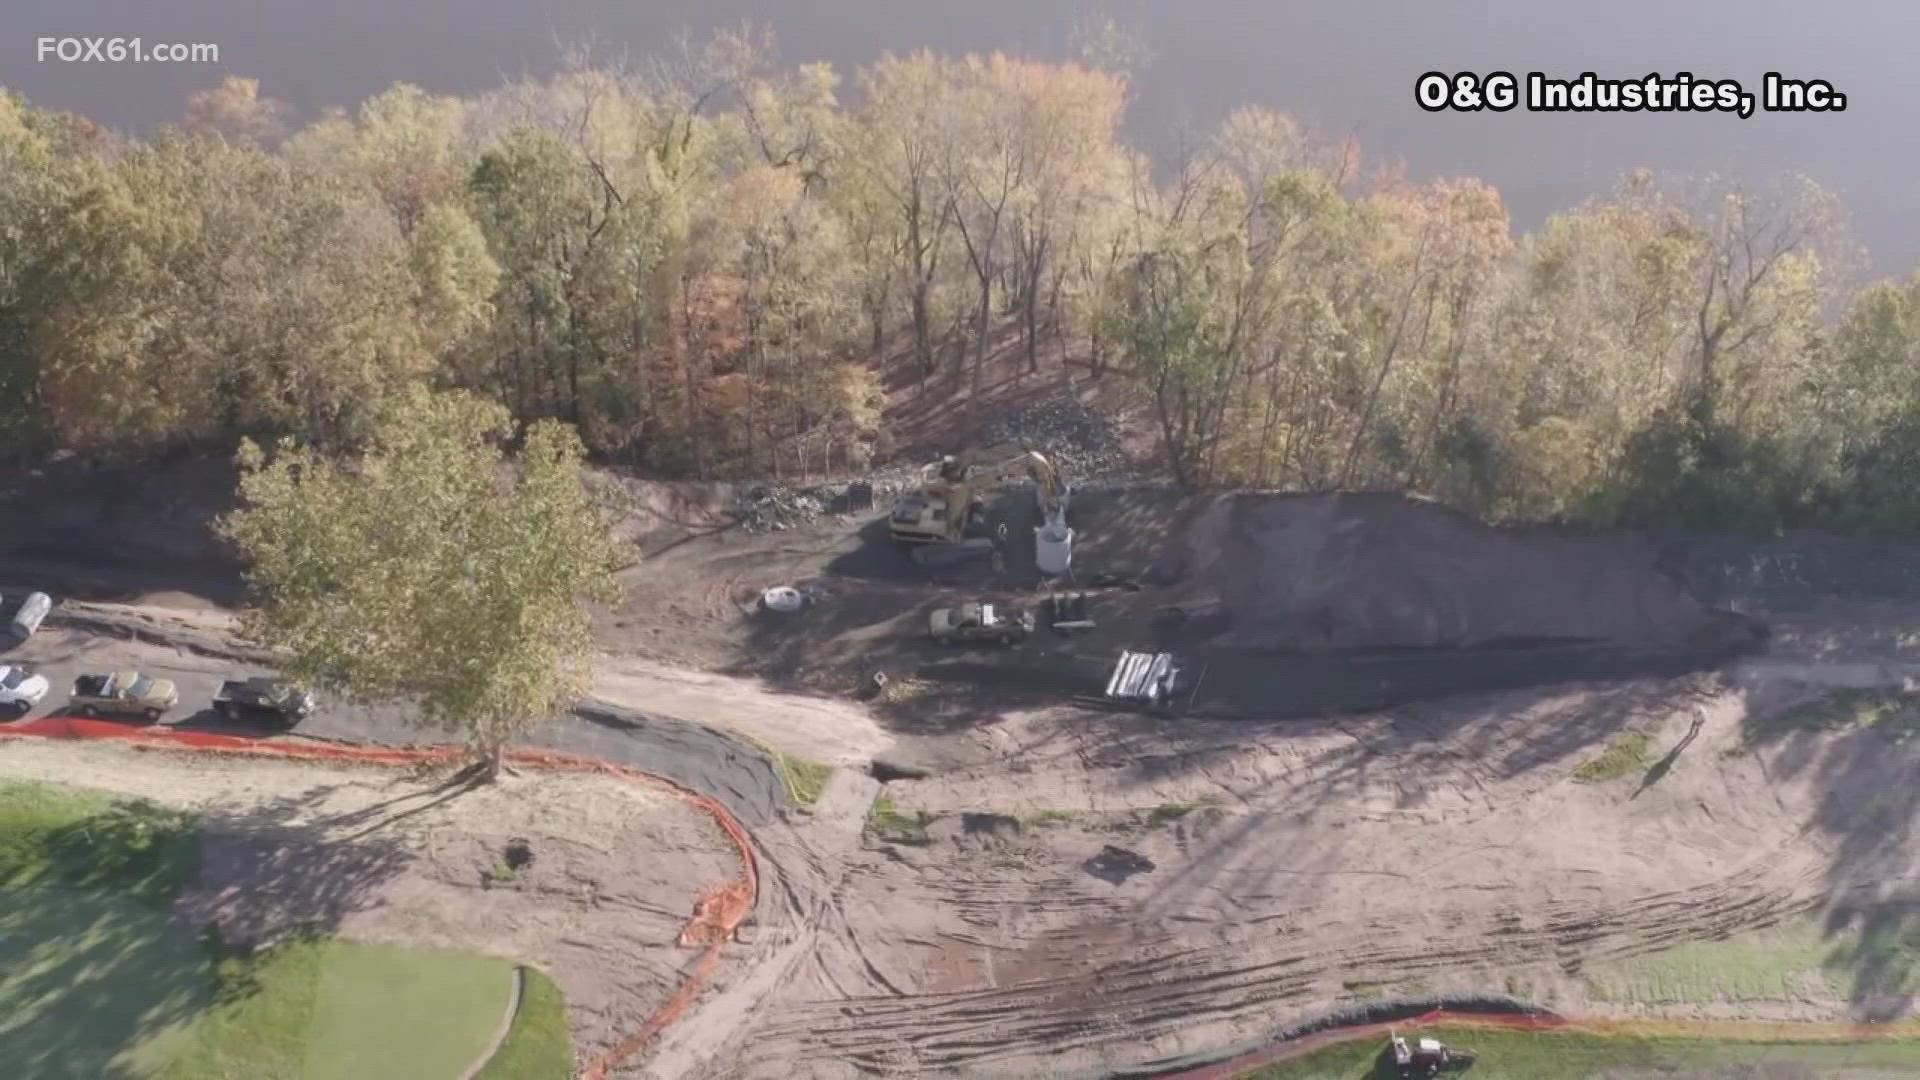 Hole 13 at TPC River highlands was torn apart in Hurricane Ida, but the area was repaired in just a few months.